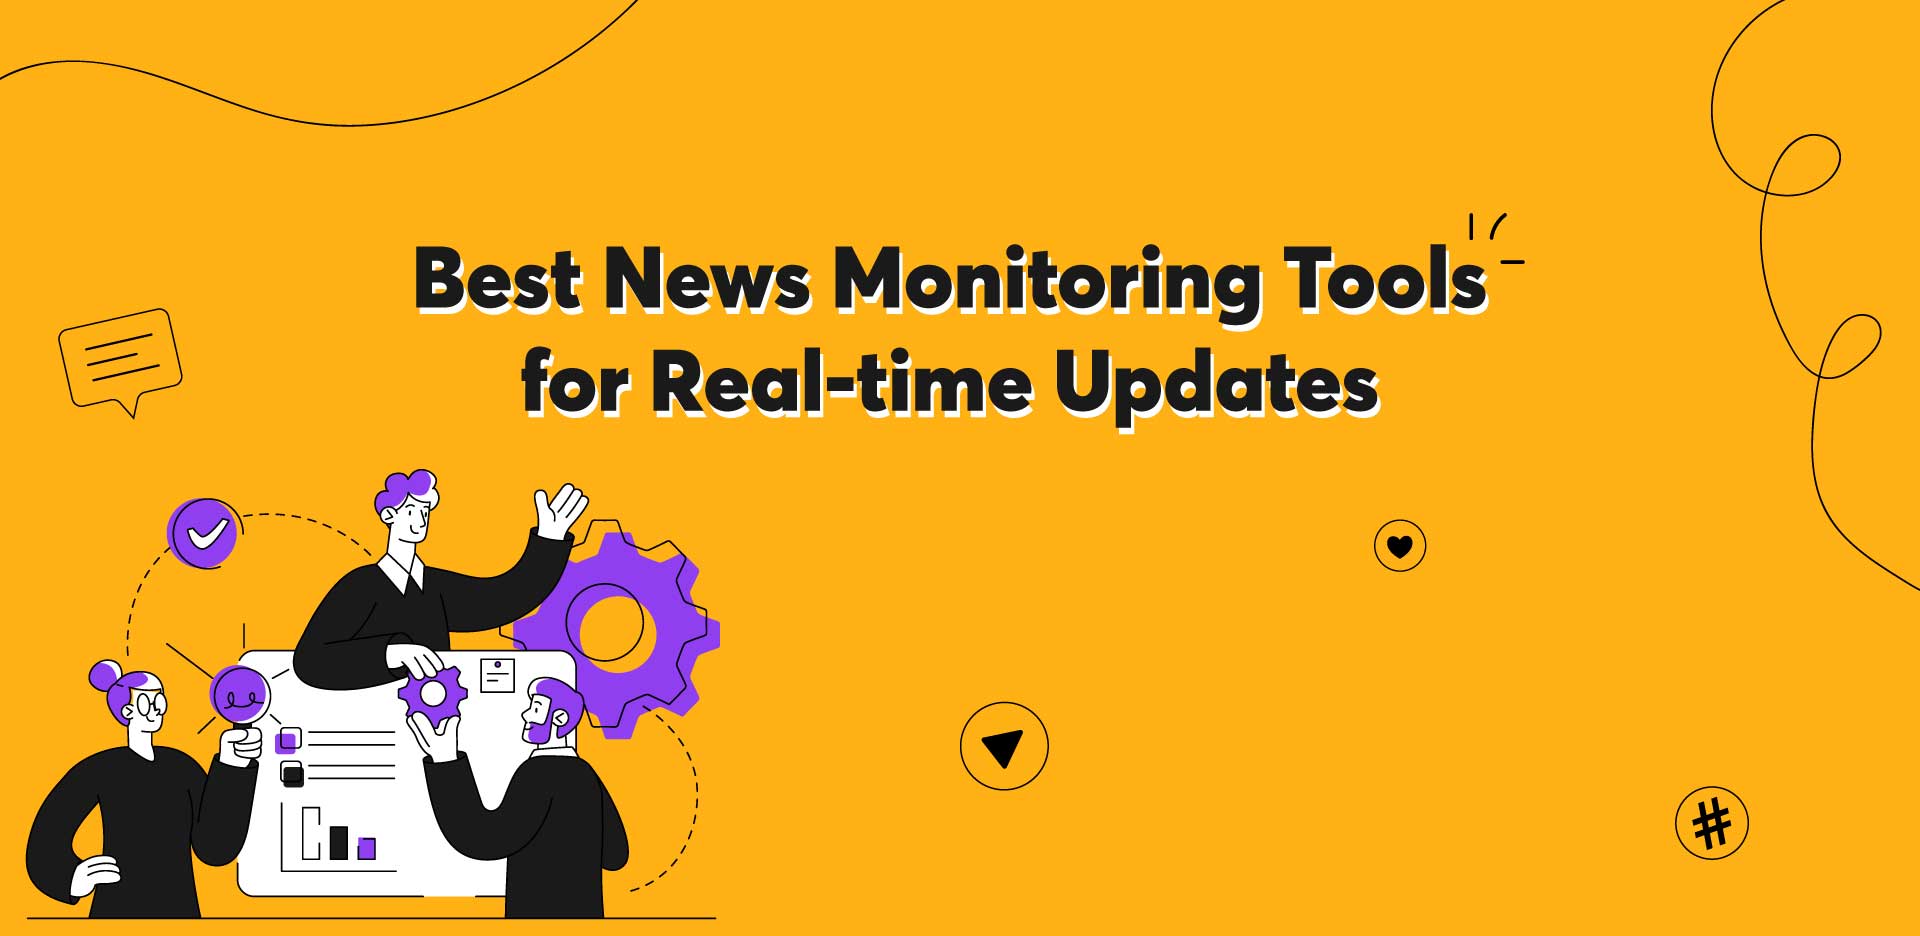 Online News Monitoring: Keeping Up with the Digital Age